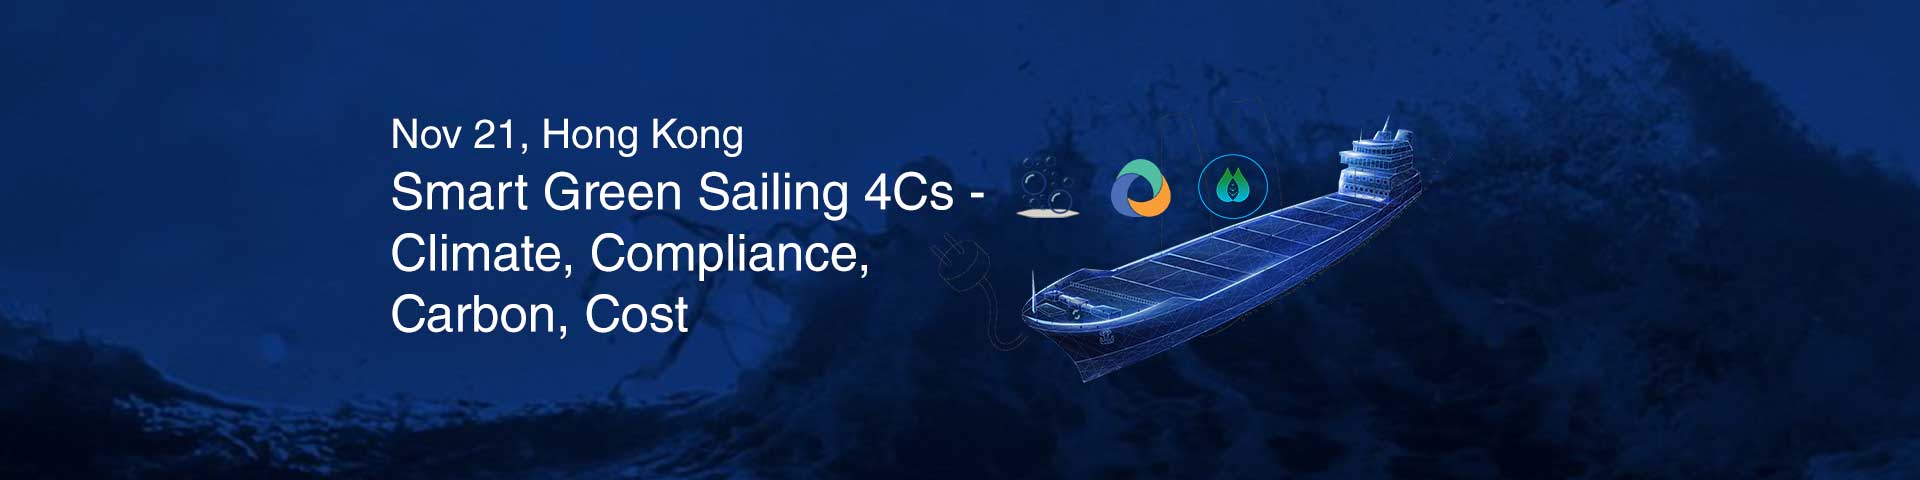 Smart-Green-Sailing Web Banner with title ansship3 1920x480